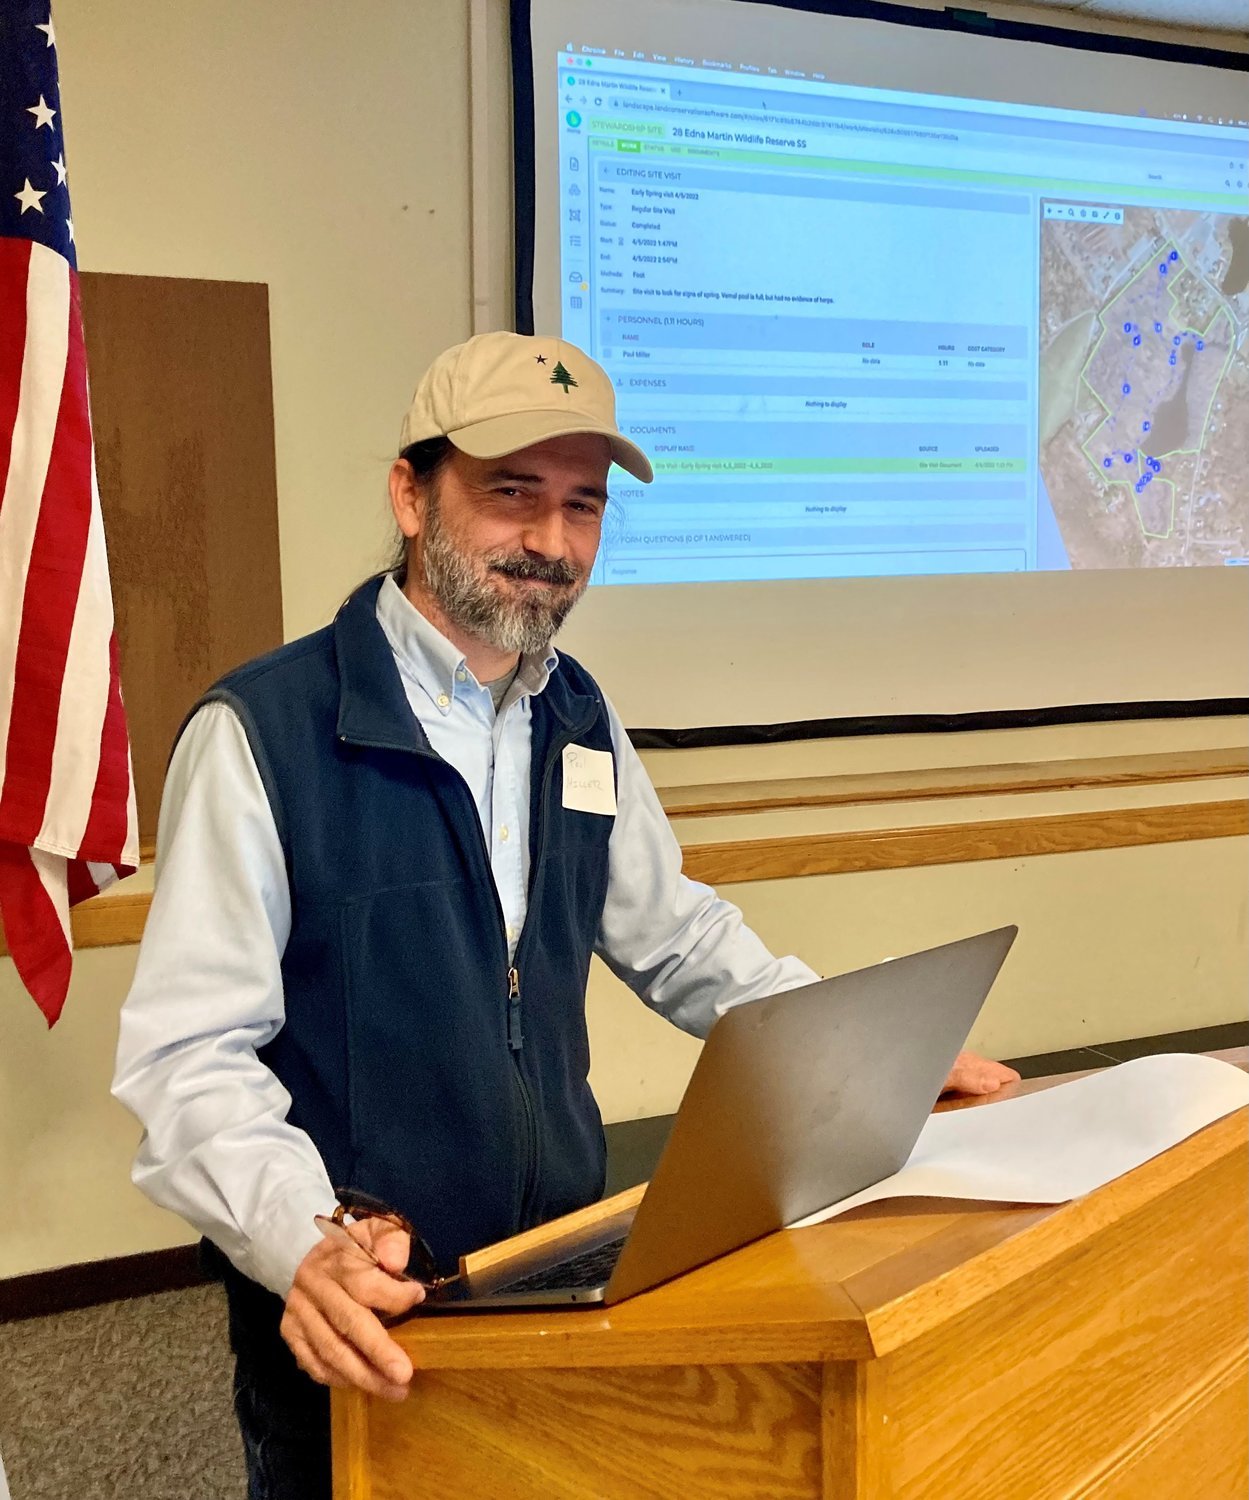  Paul Miller, Stewardship coordinator, describes the Landscape software used by SLCT as a new resource management tool. 